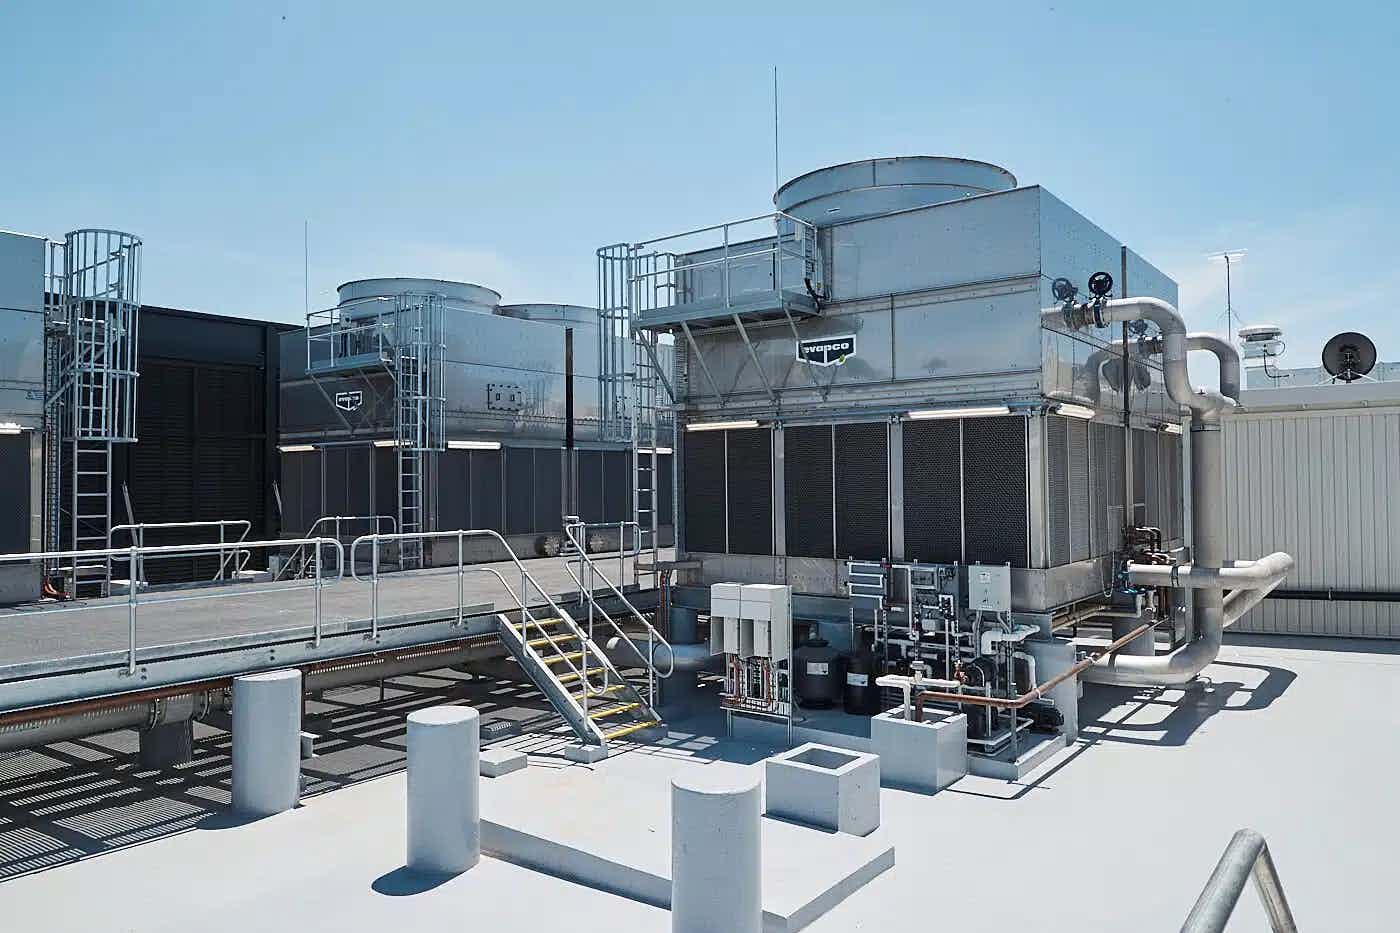 © Equinix - SY5 Rooftop Cooling Systems